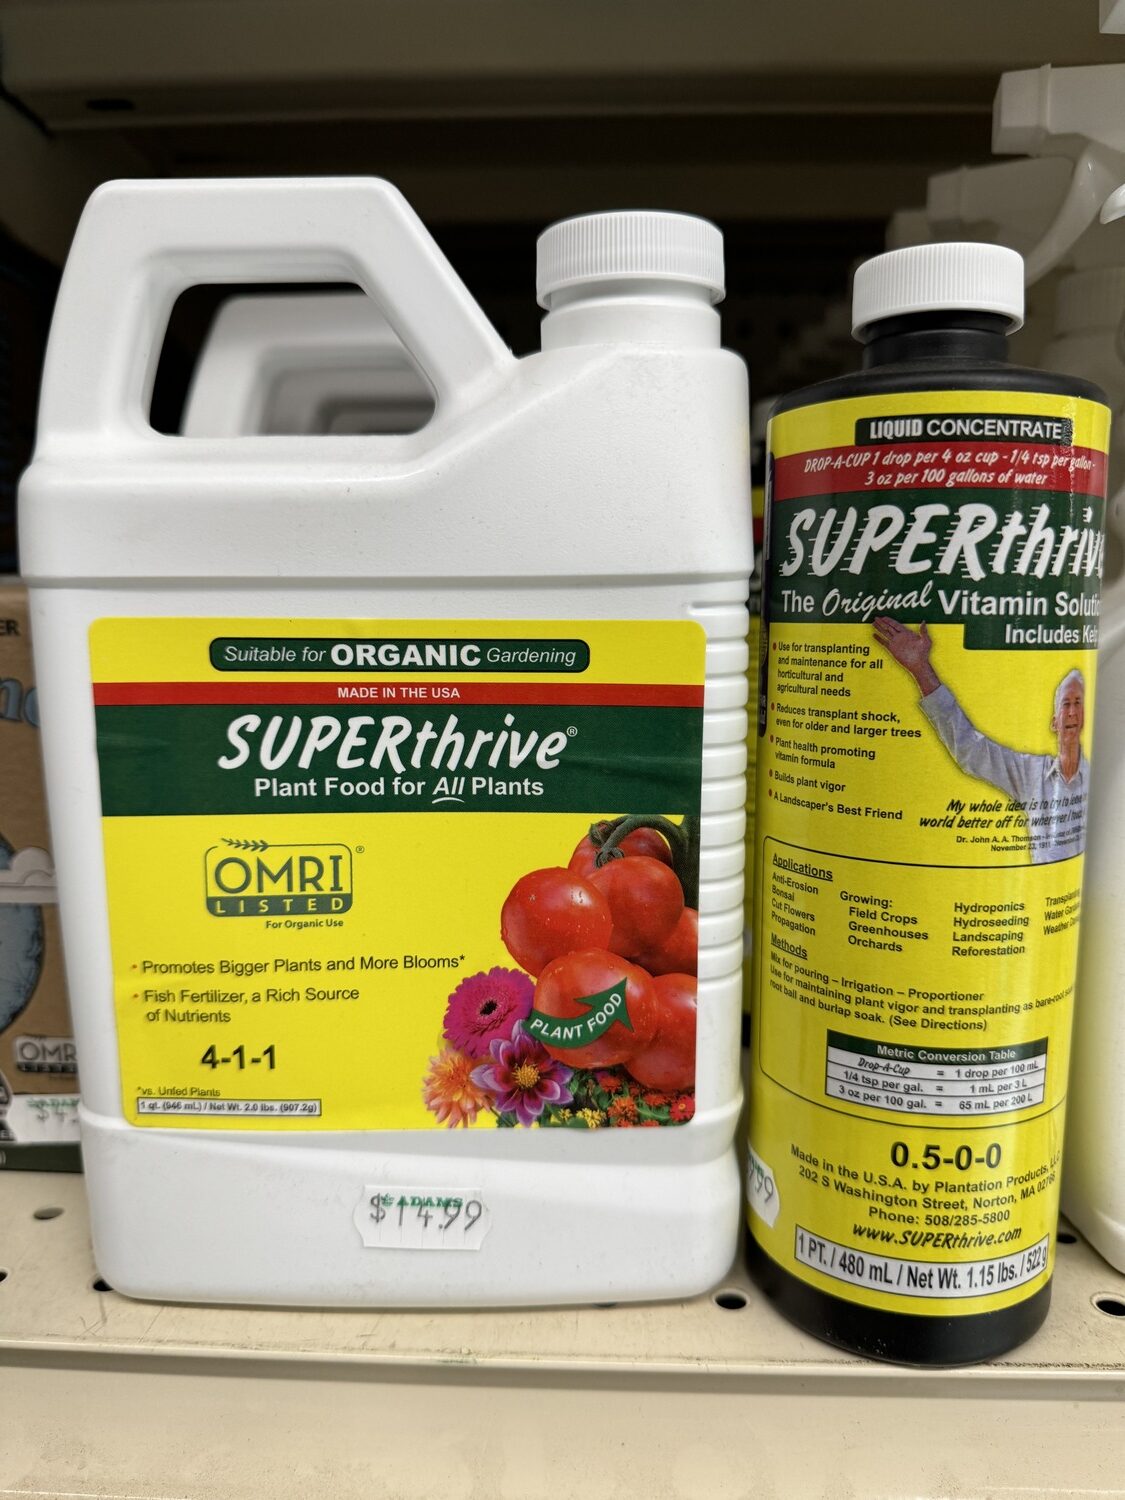 SUPERthrive has been around for decades and was sold as a plant vitamin. To confuse matters the SUPERthrive product on the left now contains fertilizer and is sold as a 